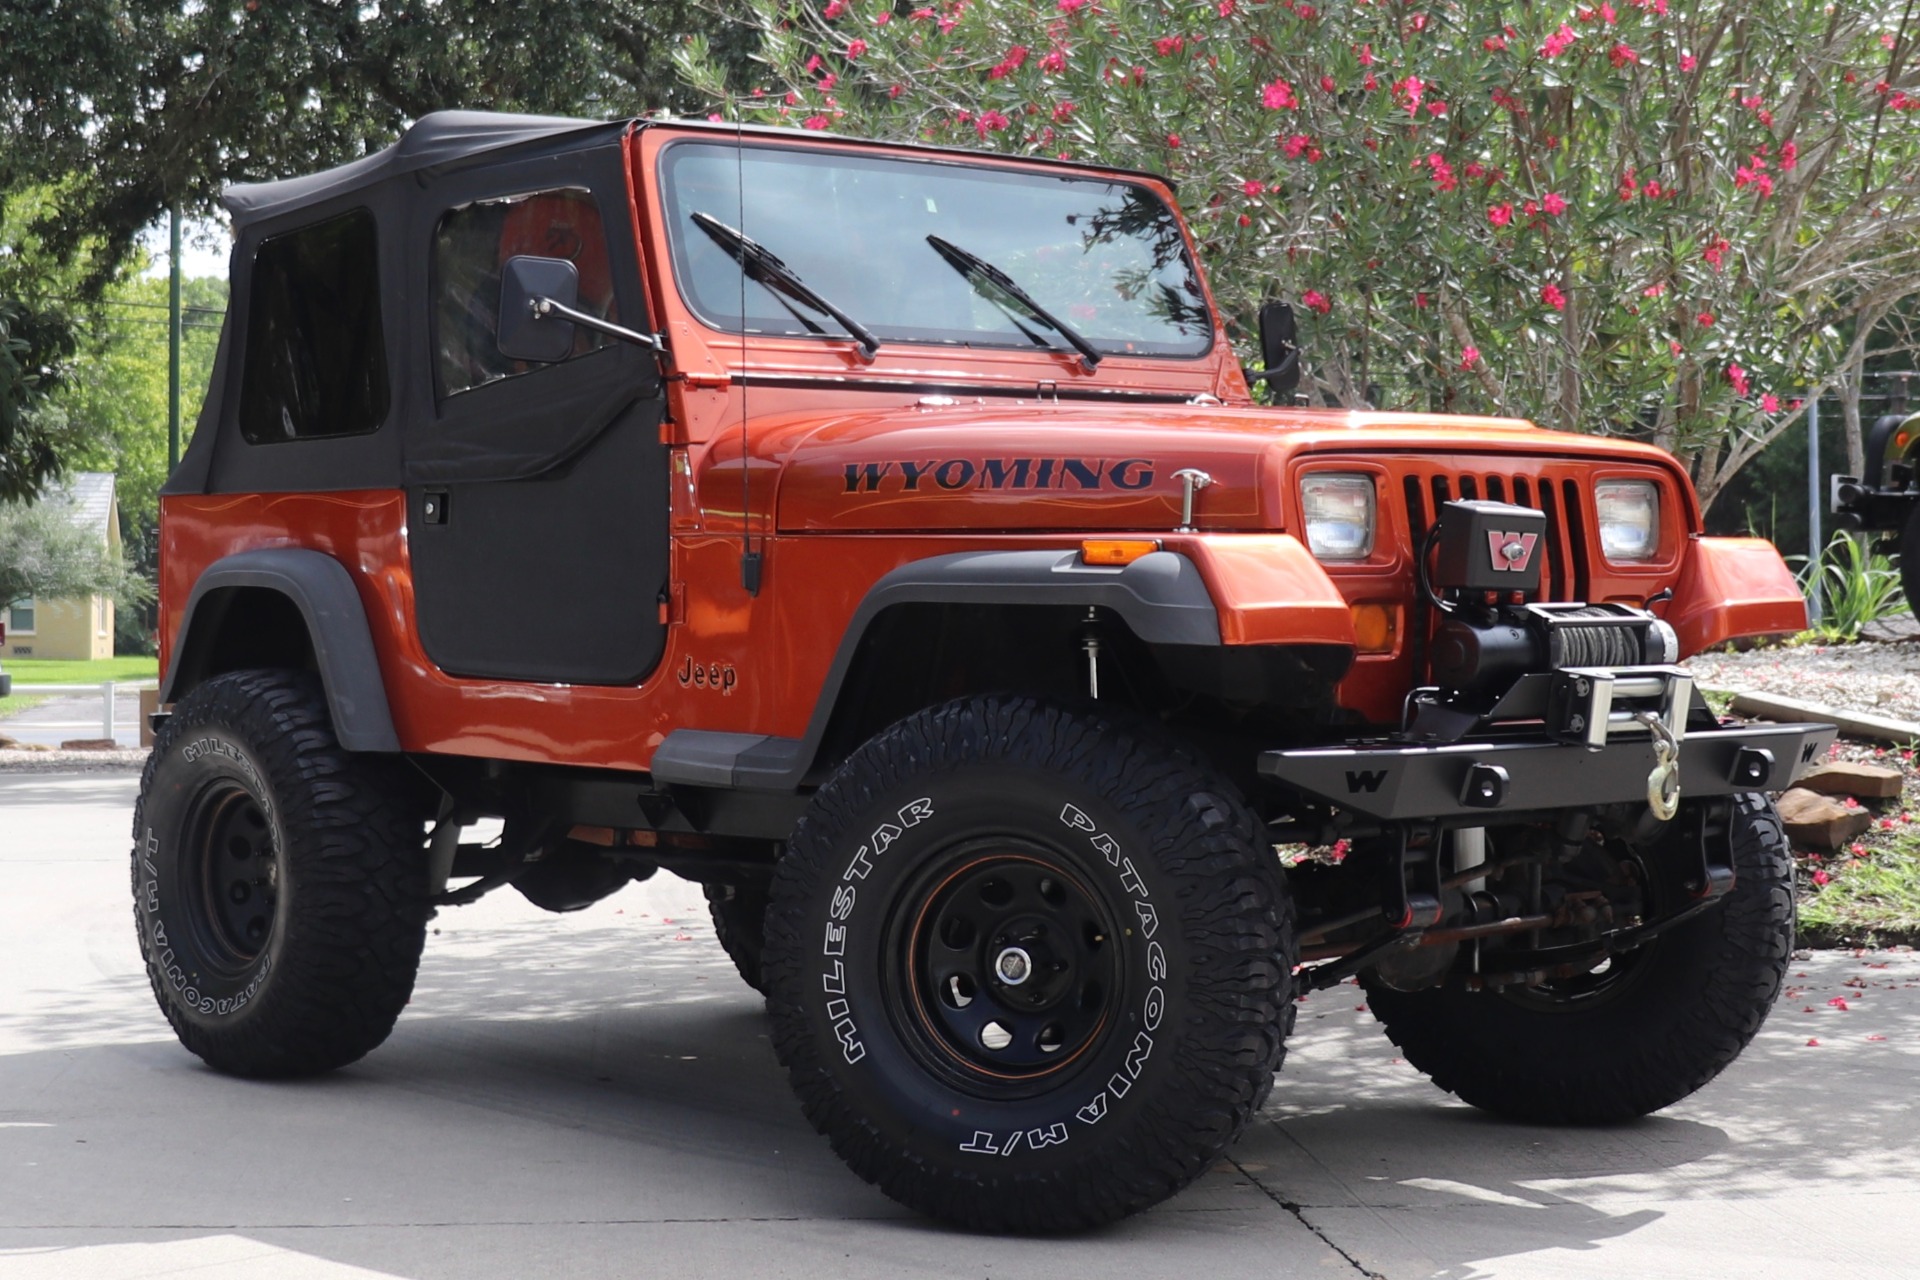 Used 1992 Jeep Wrangler For Sale ($11,995) | Select Jeeps Inc. Stock #547813